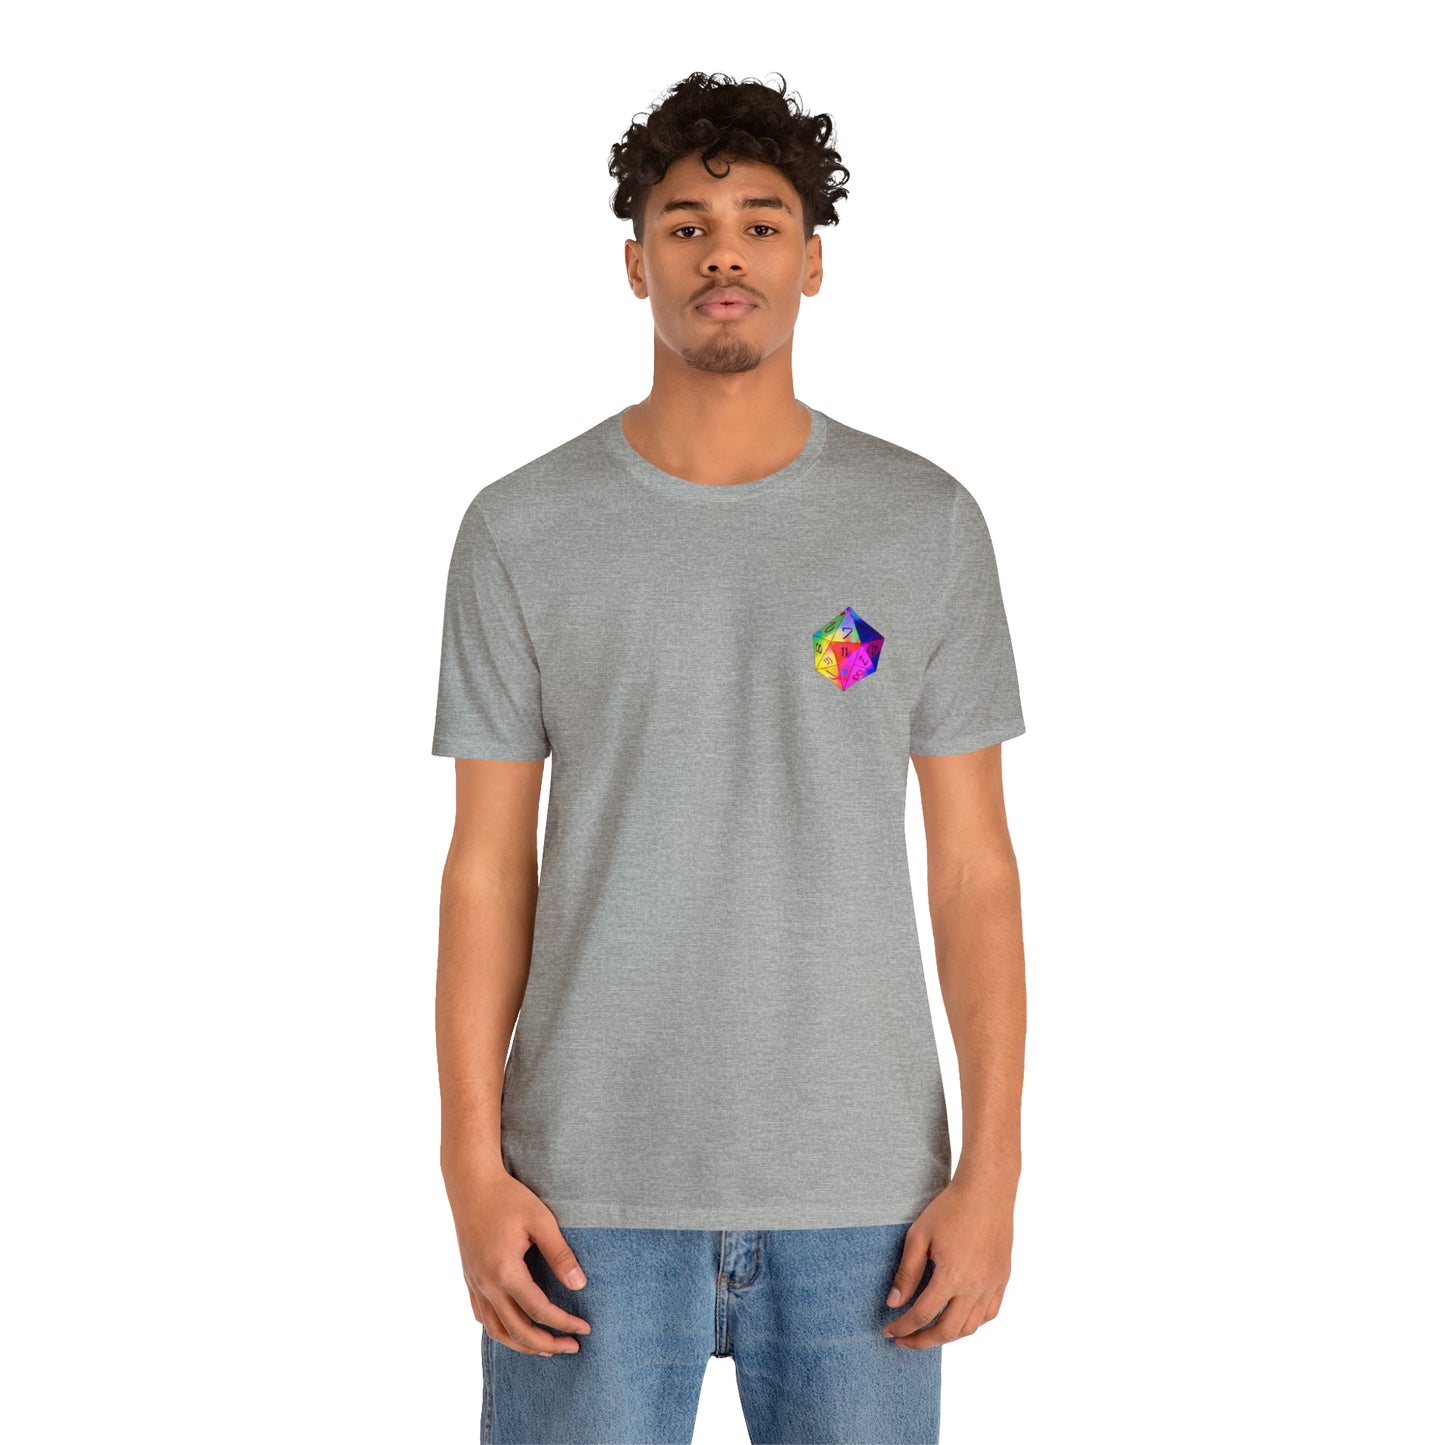 athletic-heather-quest-thread-tee-shirt-with-small-rainbow-dice-on-left-chest